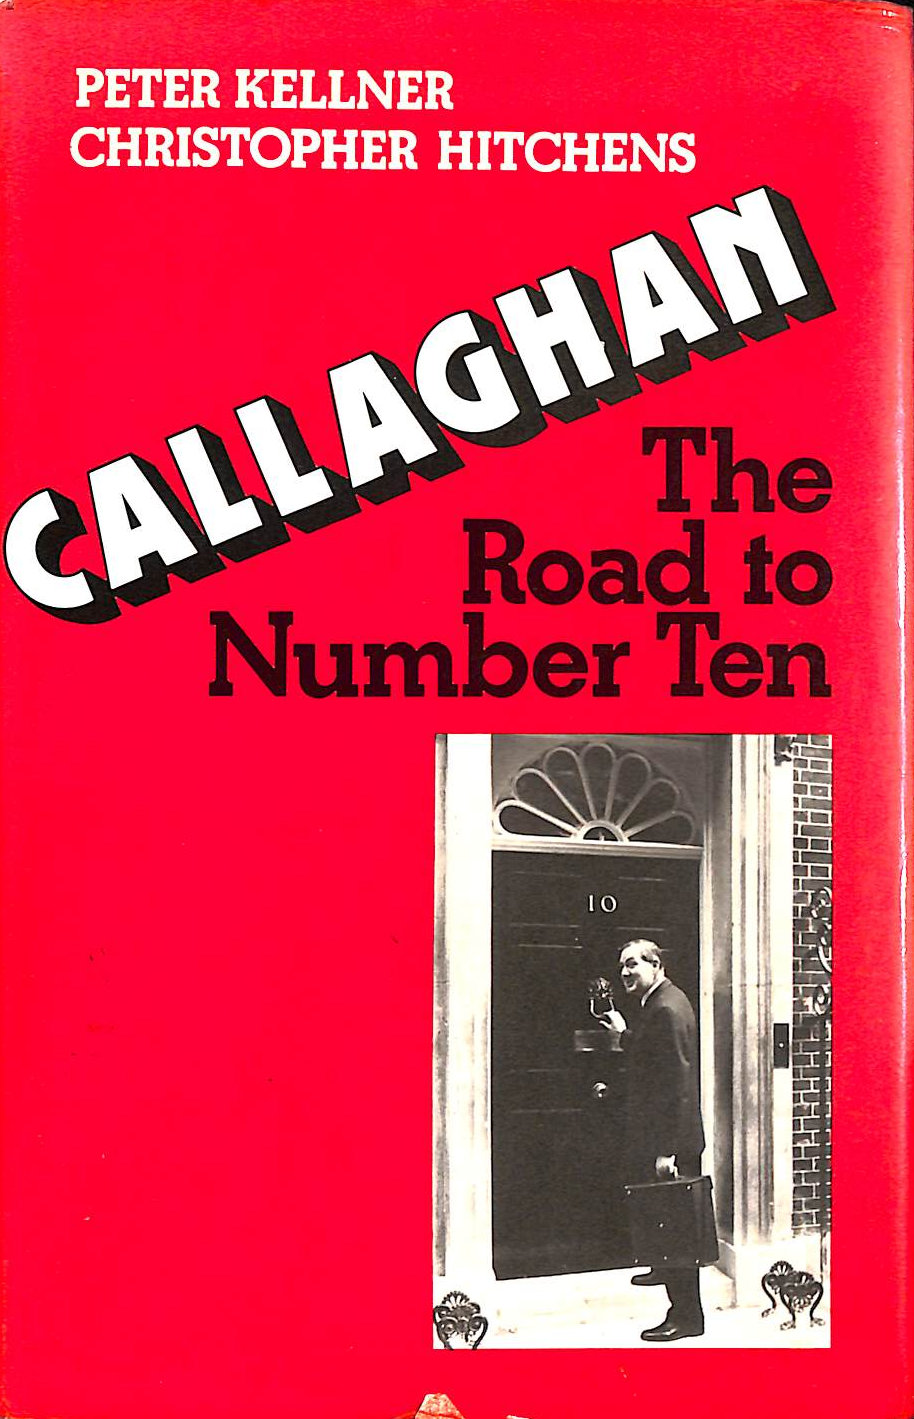 KELLNER, PETER; HITCHENS, CHRISTOPHER - Callaghan: The Road to Number 10